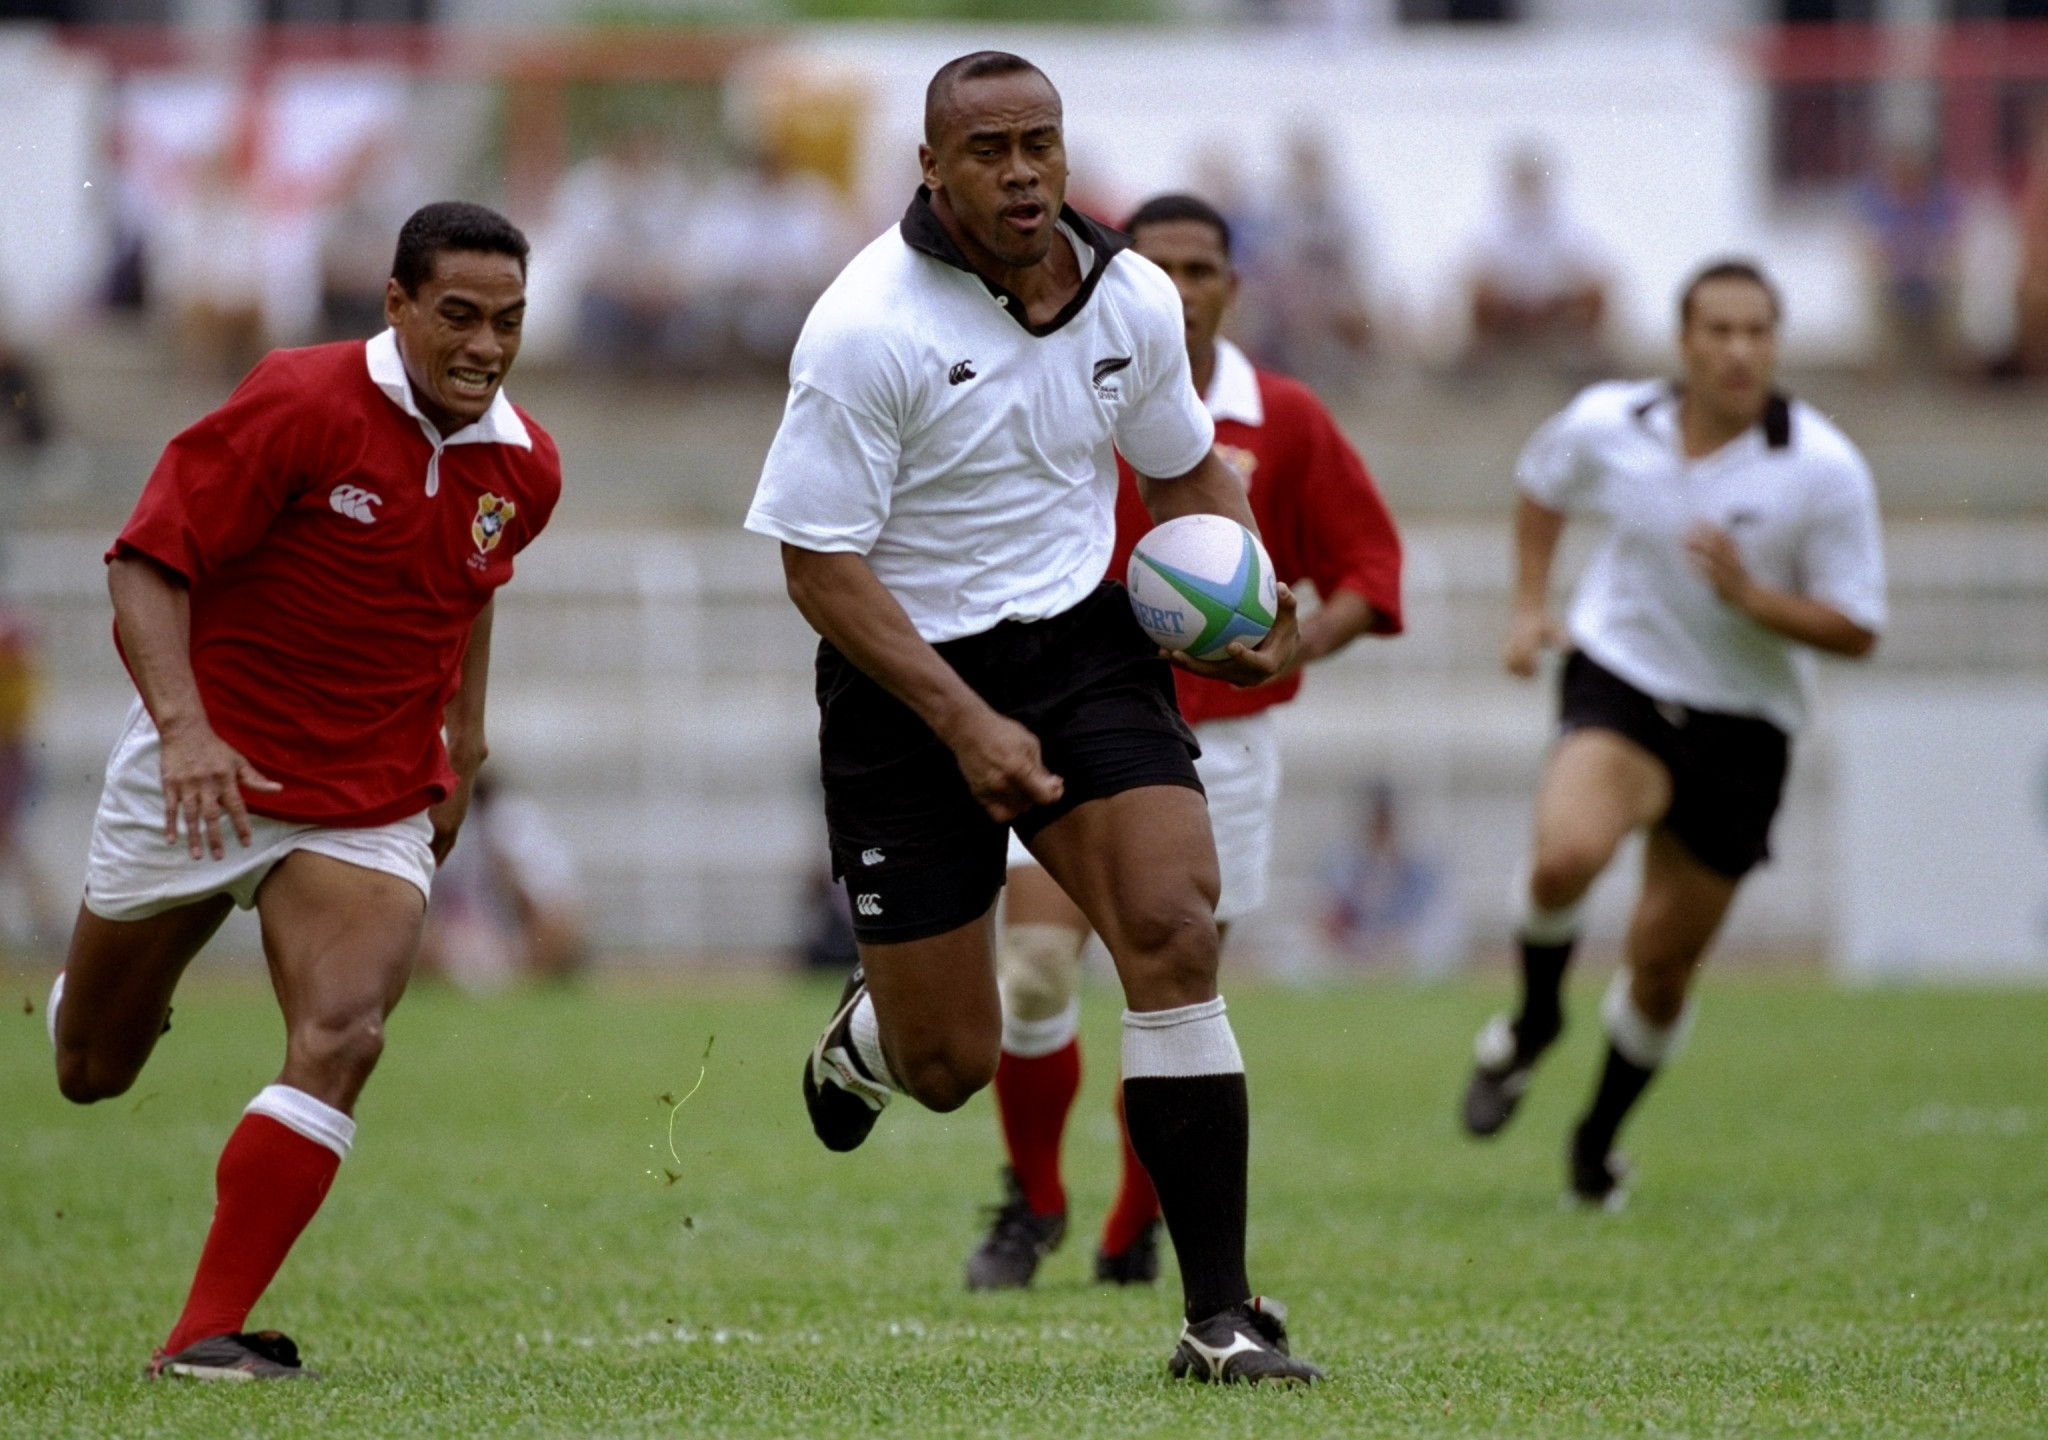 New Zealand rugby great Jonah Lomu showed his class against Malaysia at the 1998 Commonwealth Games ©Getty Images